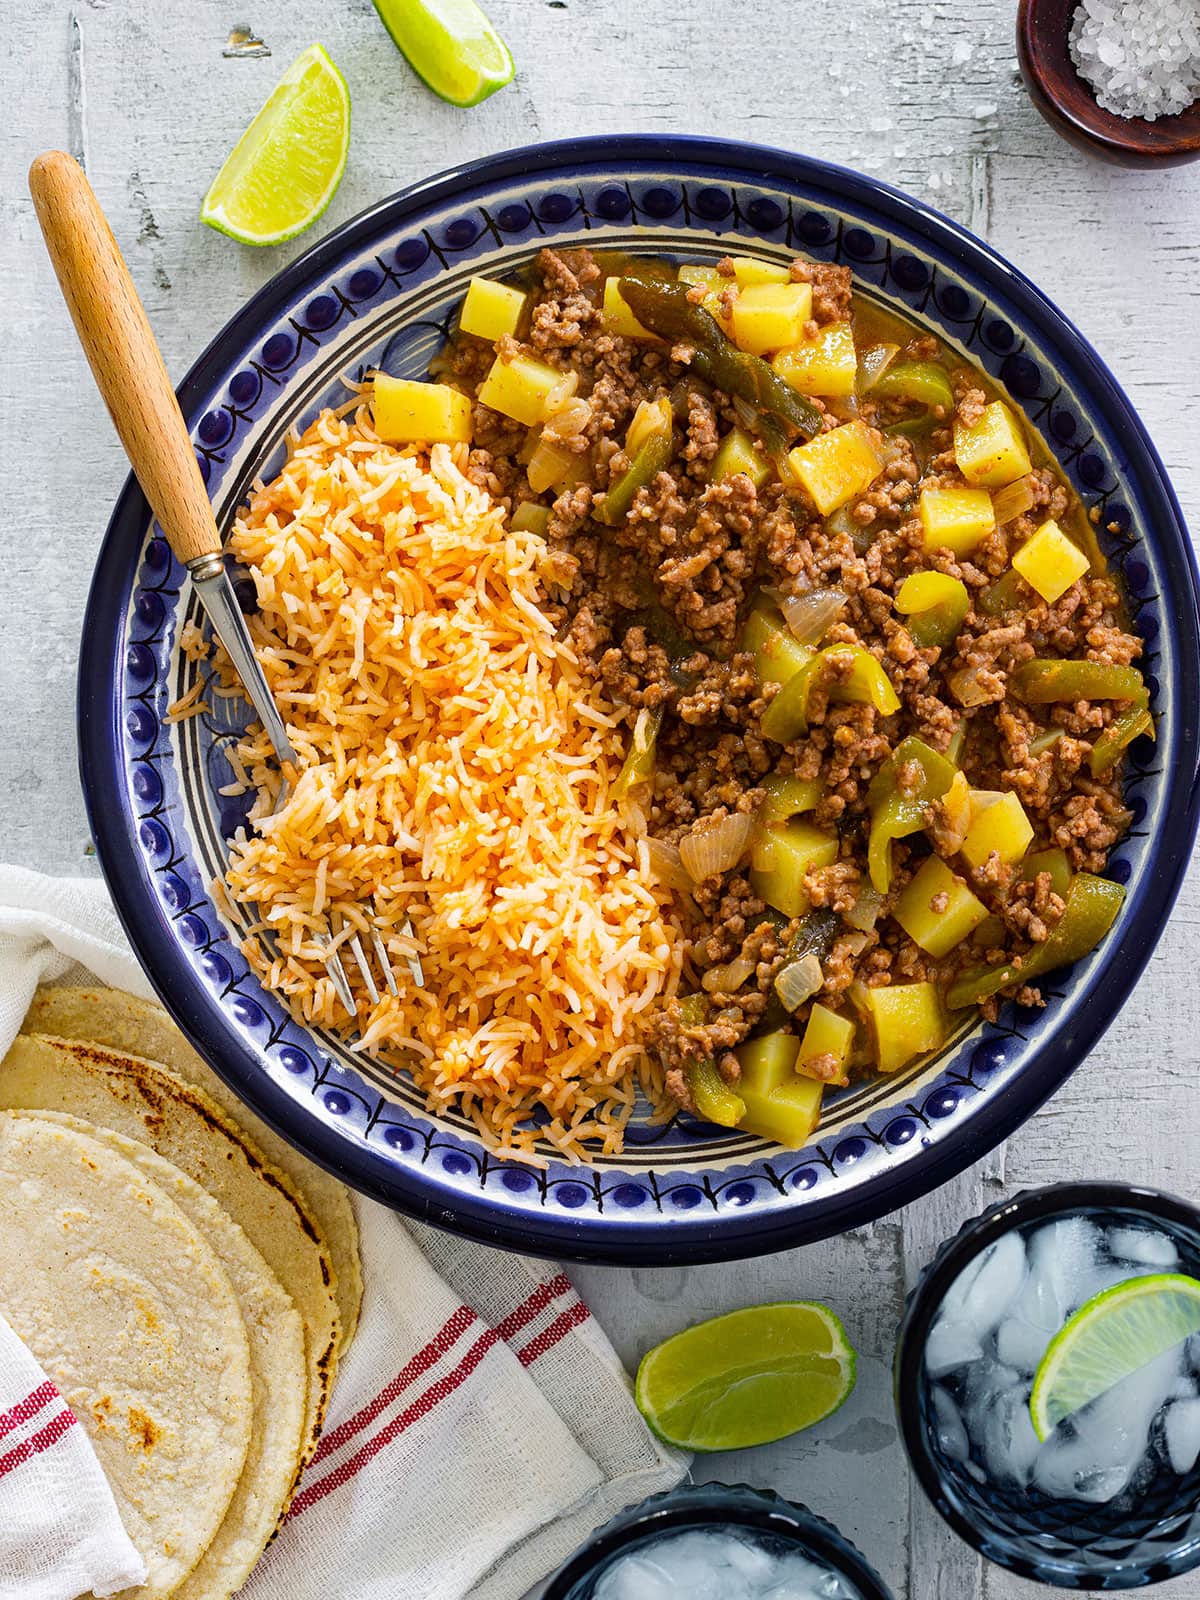 Mexican Picadillo with potatoes served on a plate with rice and tortillas.